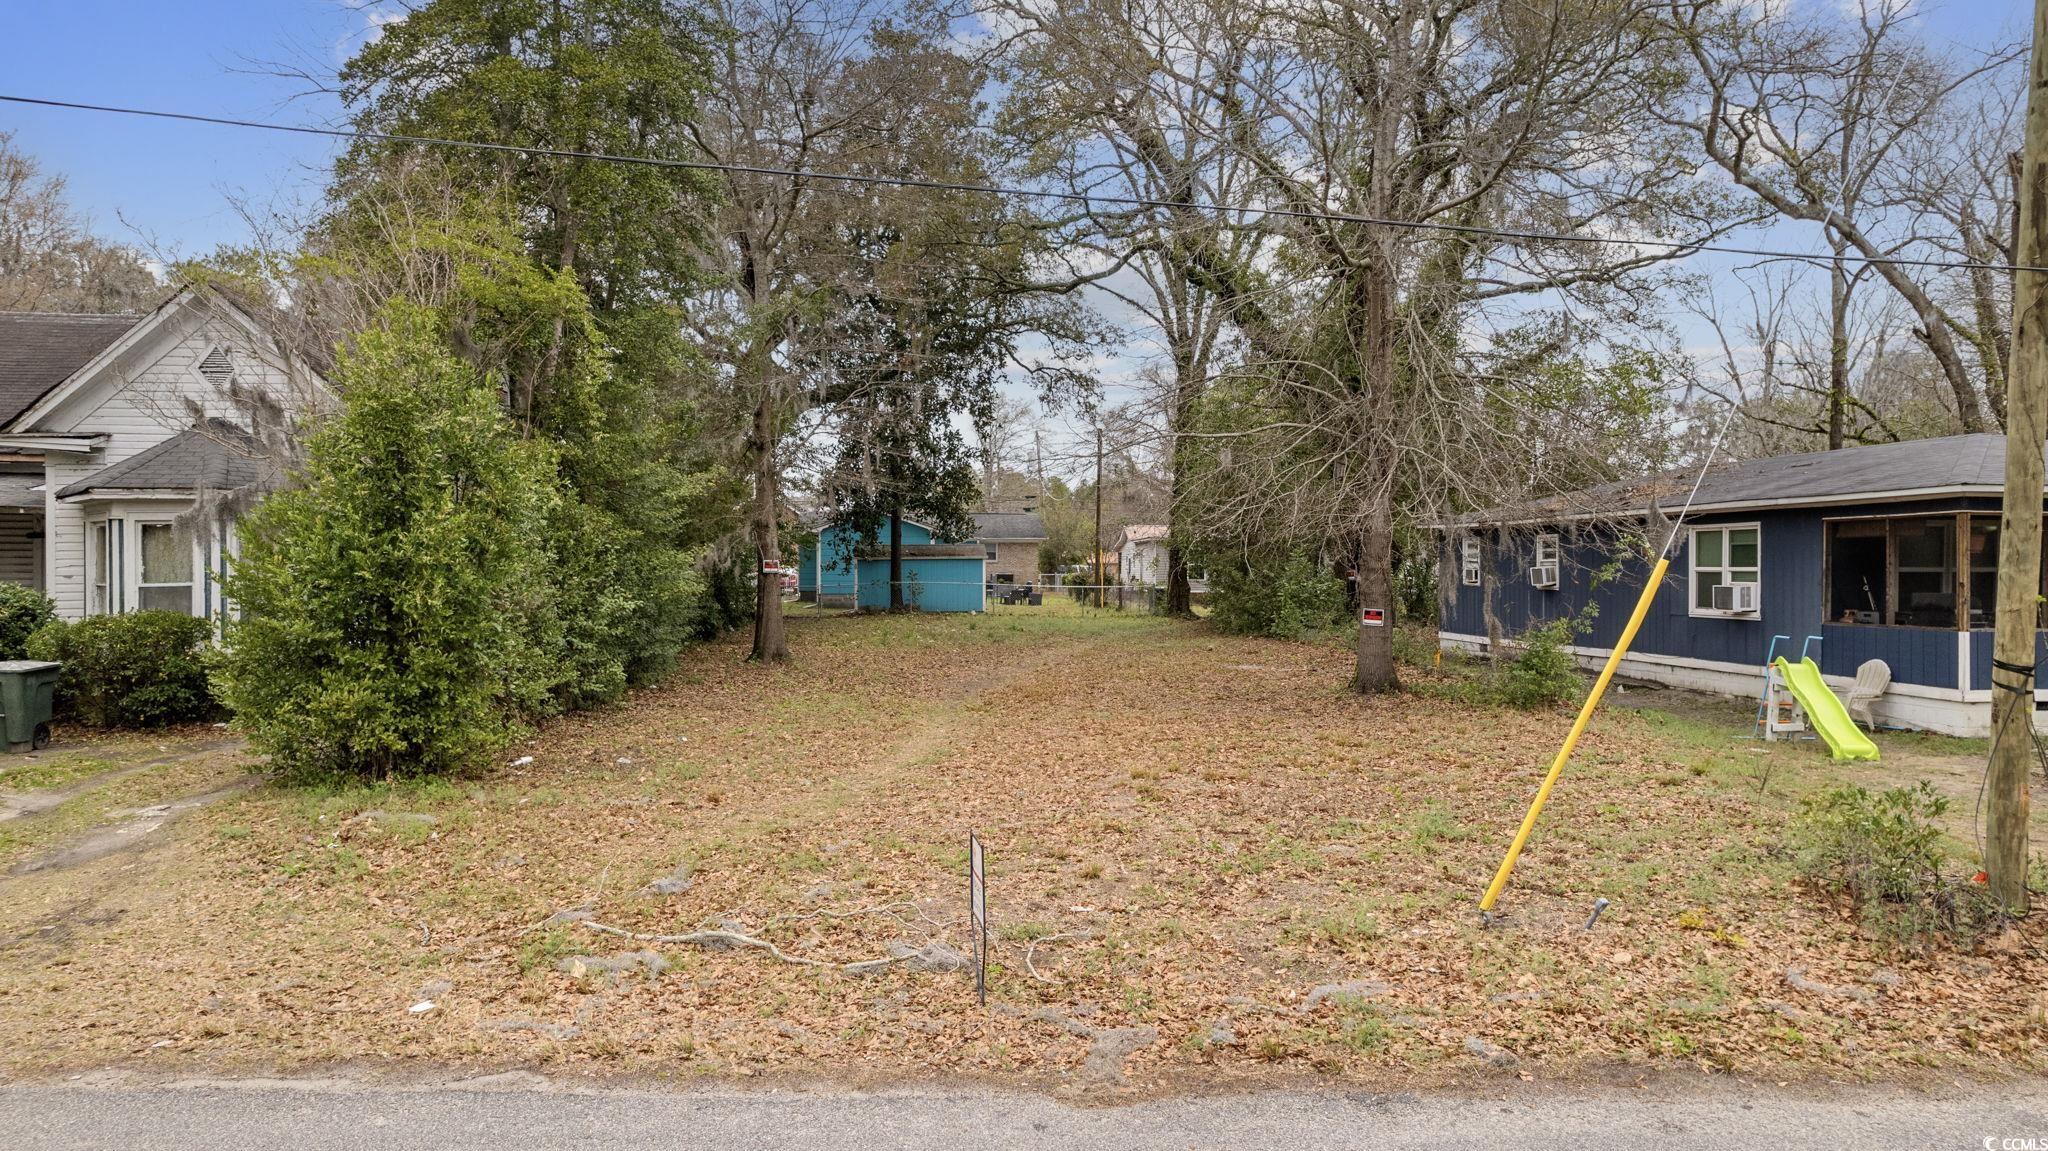 5th Ave., Conway, SC 29526